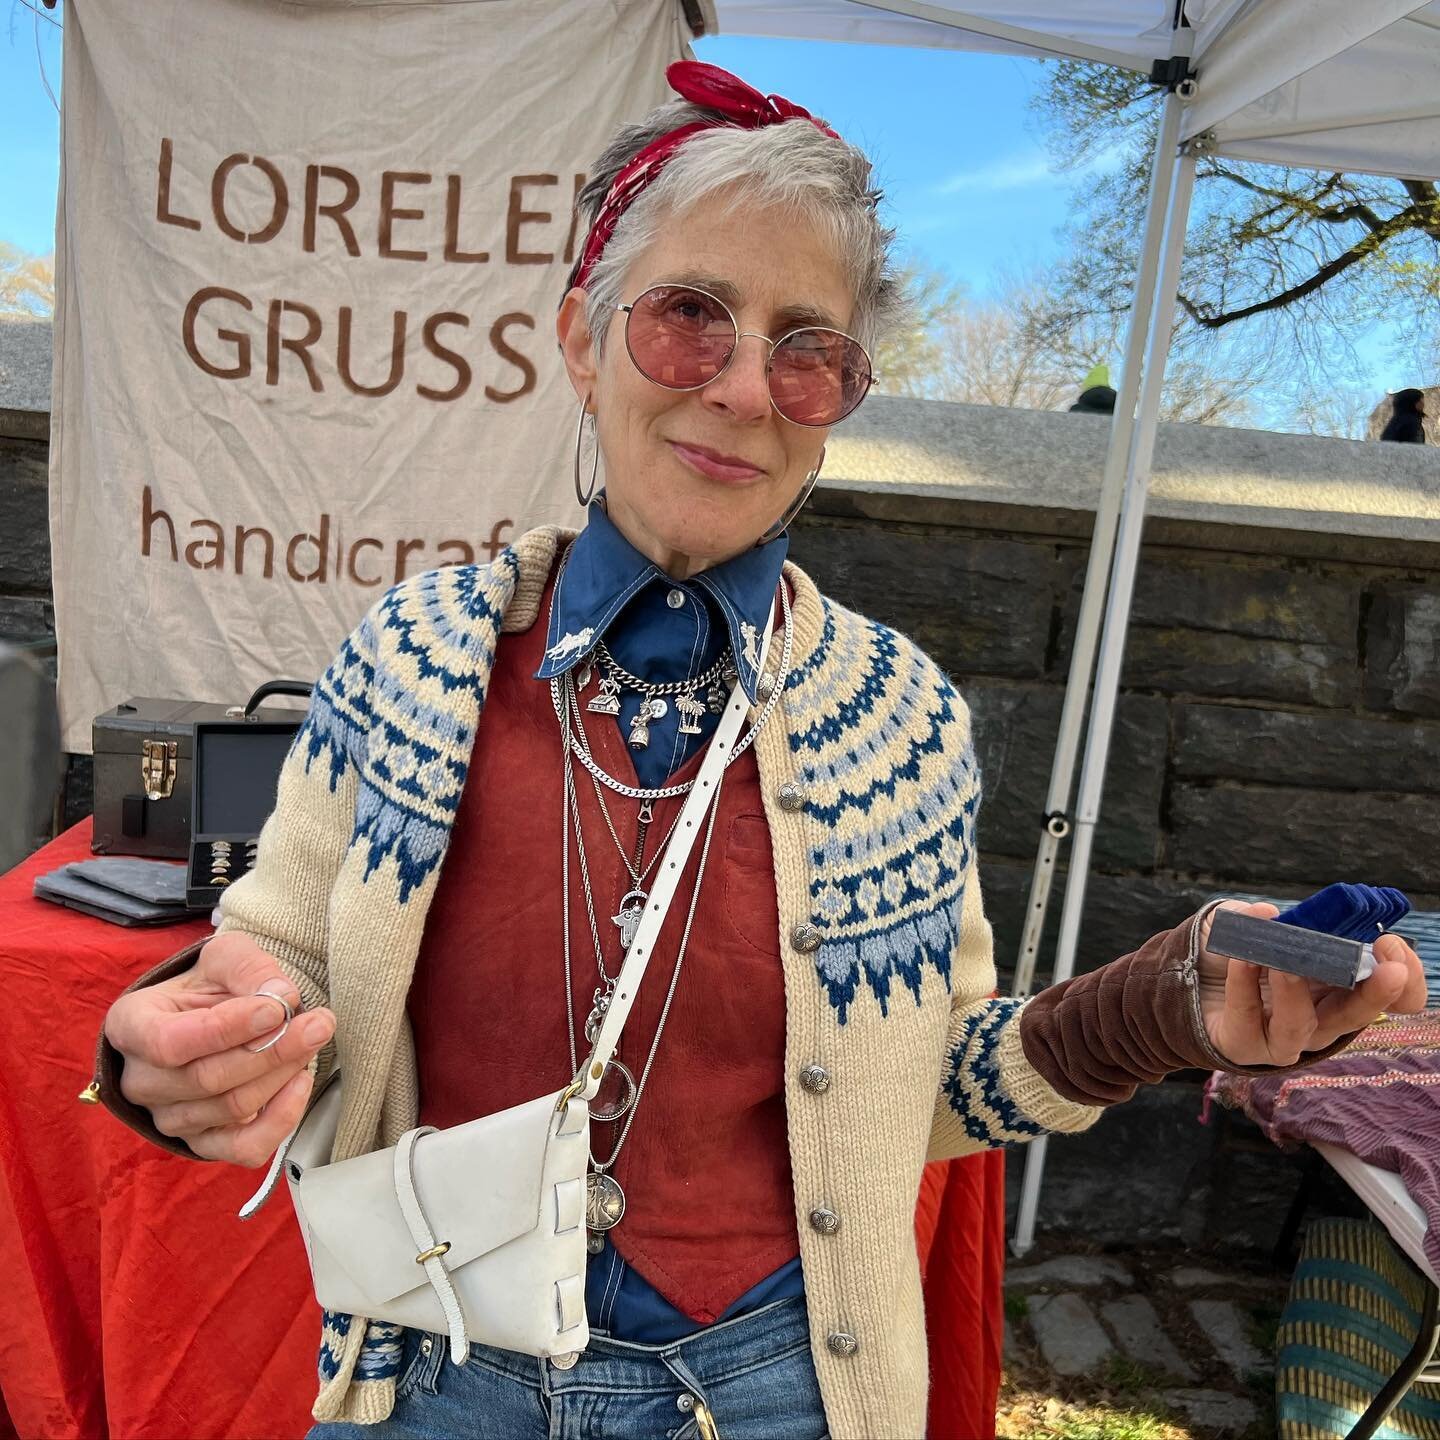 Weekend markets with my handcrafted work. Thank you @chesterhiggins12 for such a great pic! Saturdays in Brooklyn, Sundays in Manhattan, see you soon!